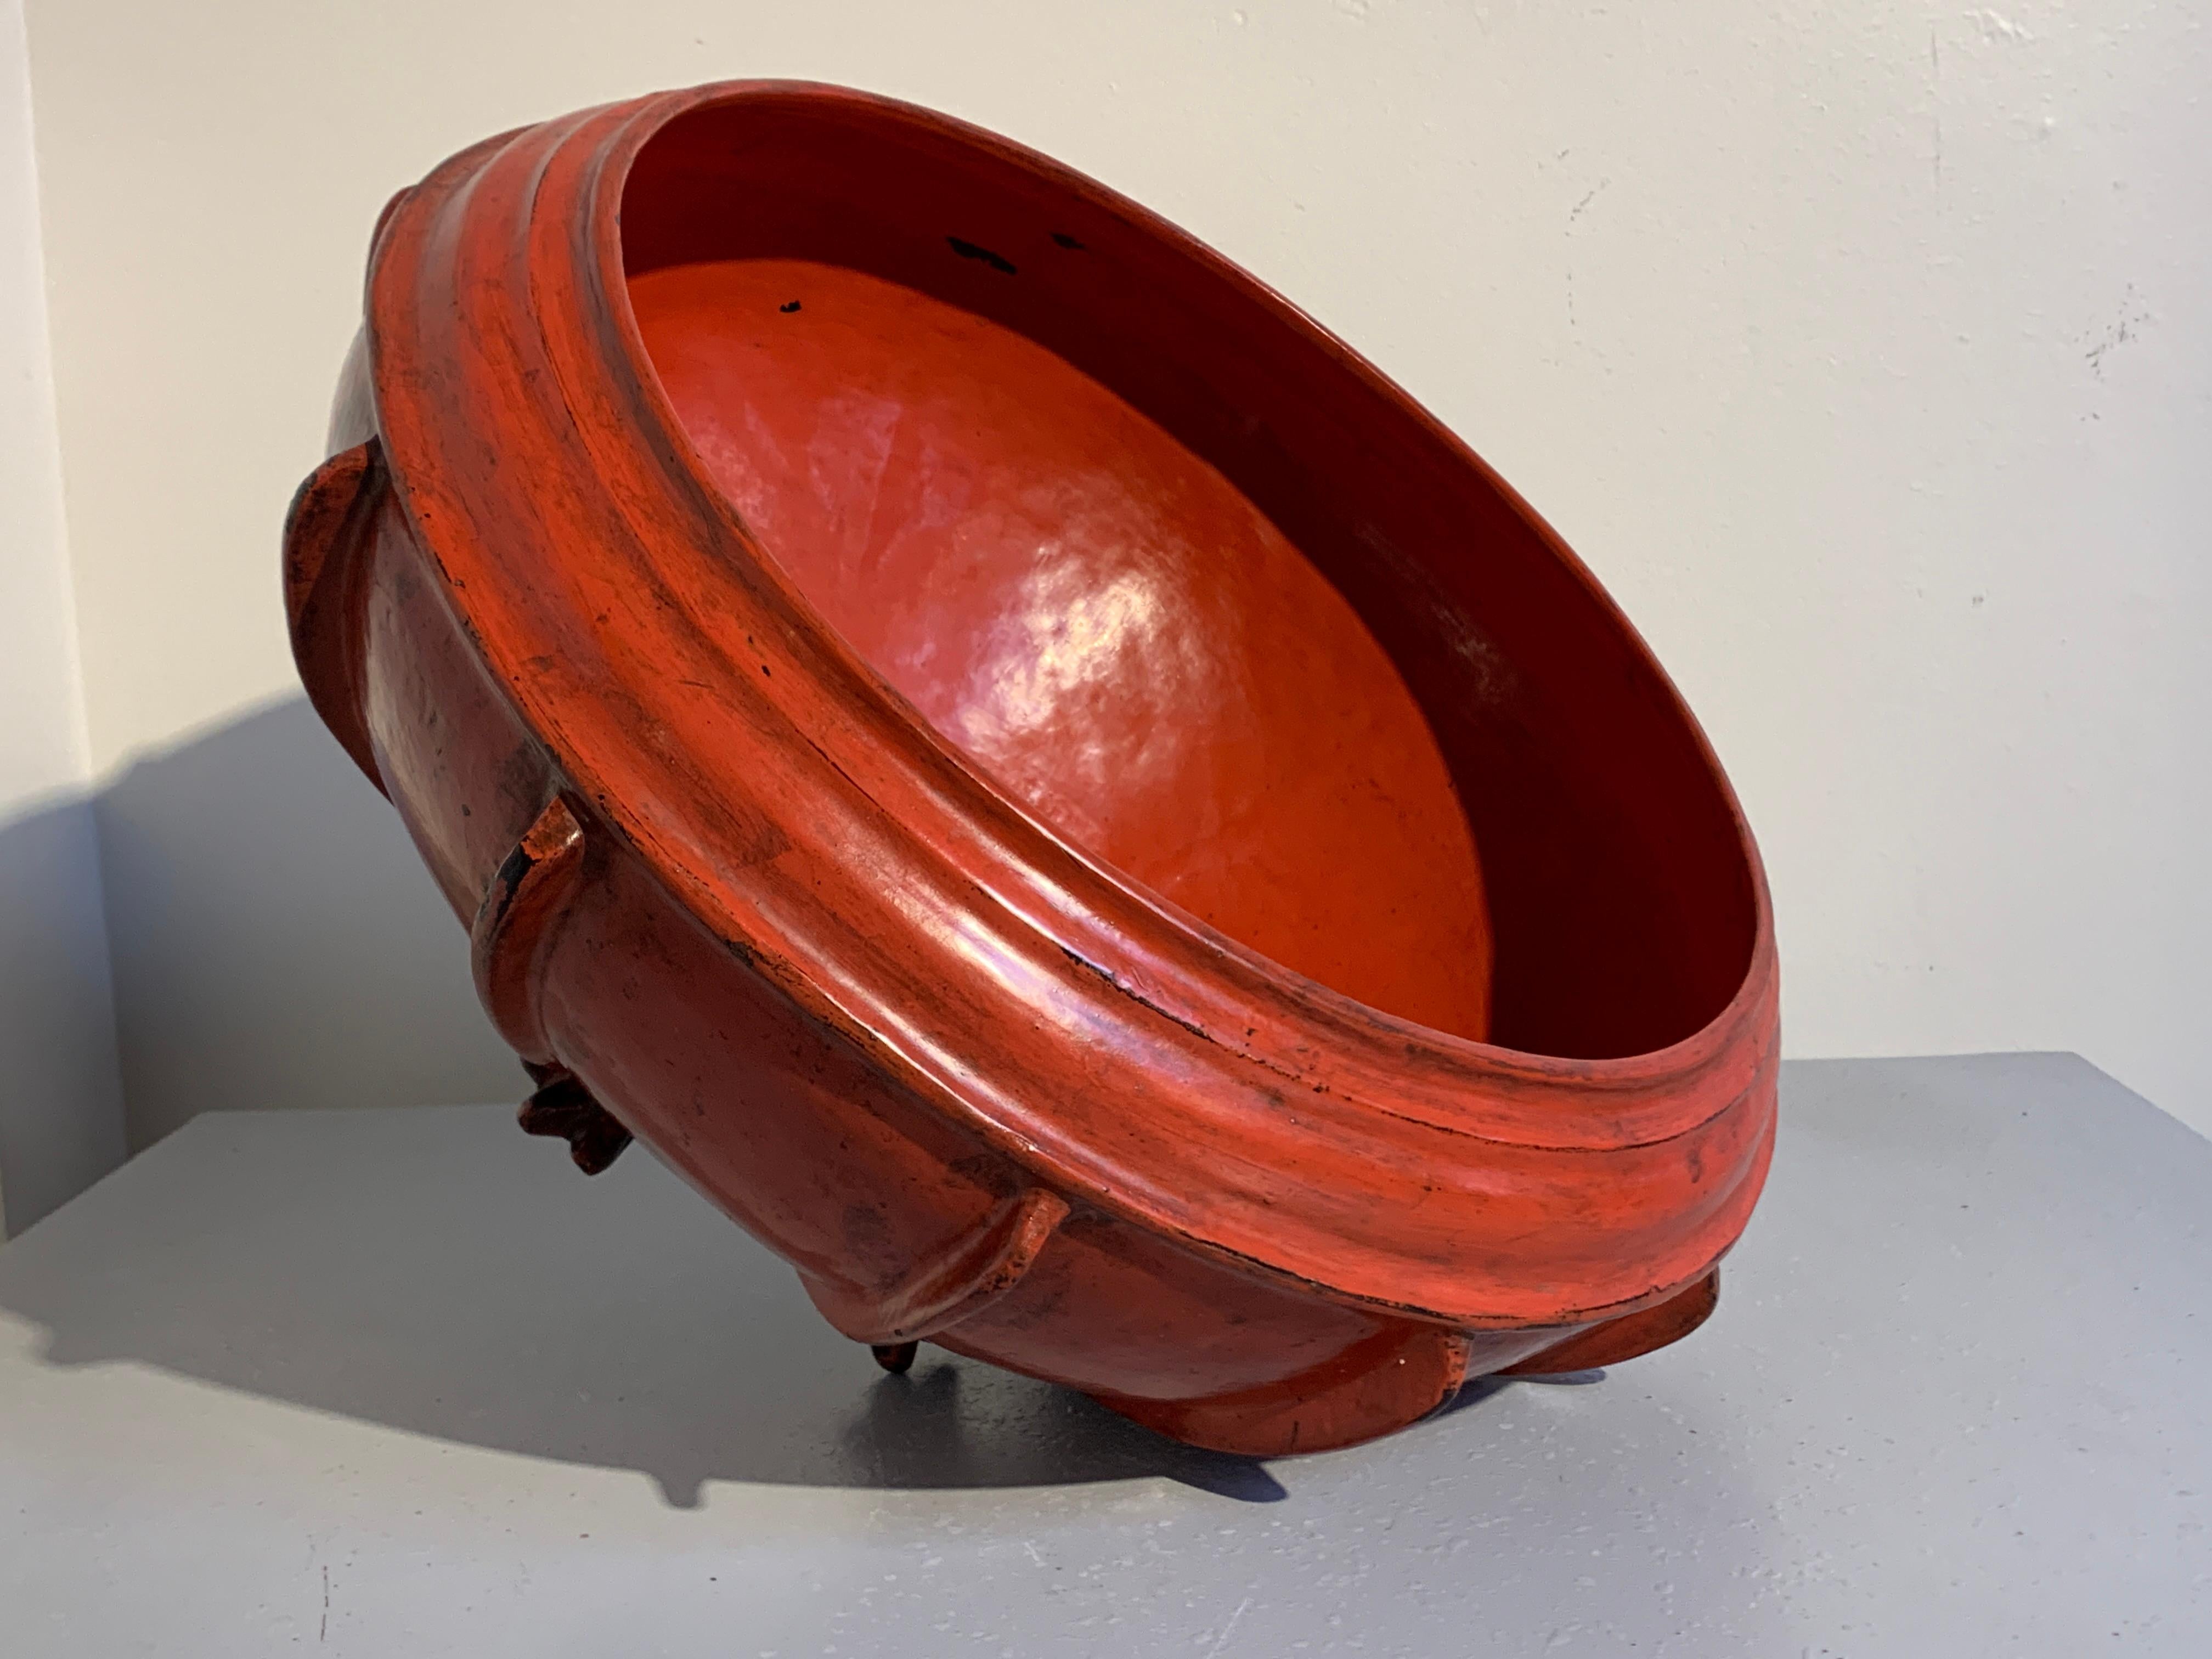 Bamboo Large Burmese Red Lacquer Large Offering Bowl, Late 19th or Early 20th Century